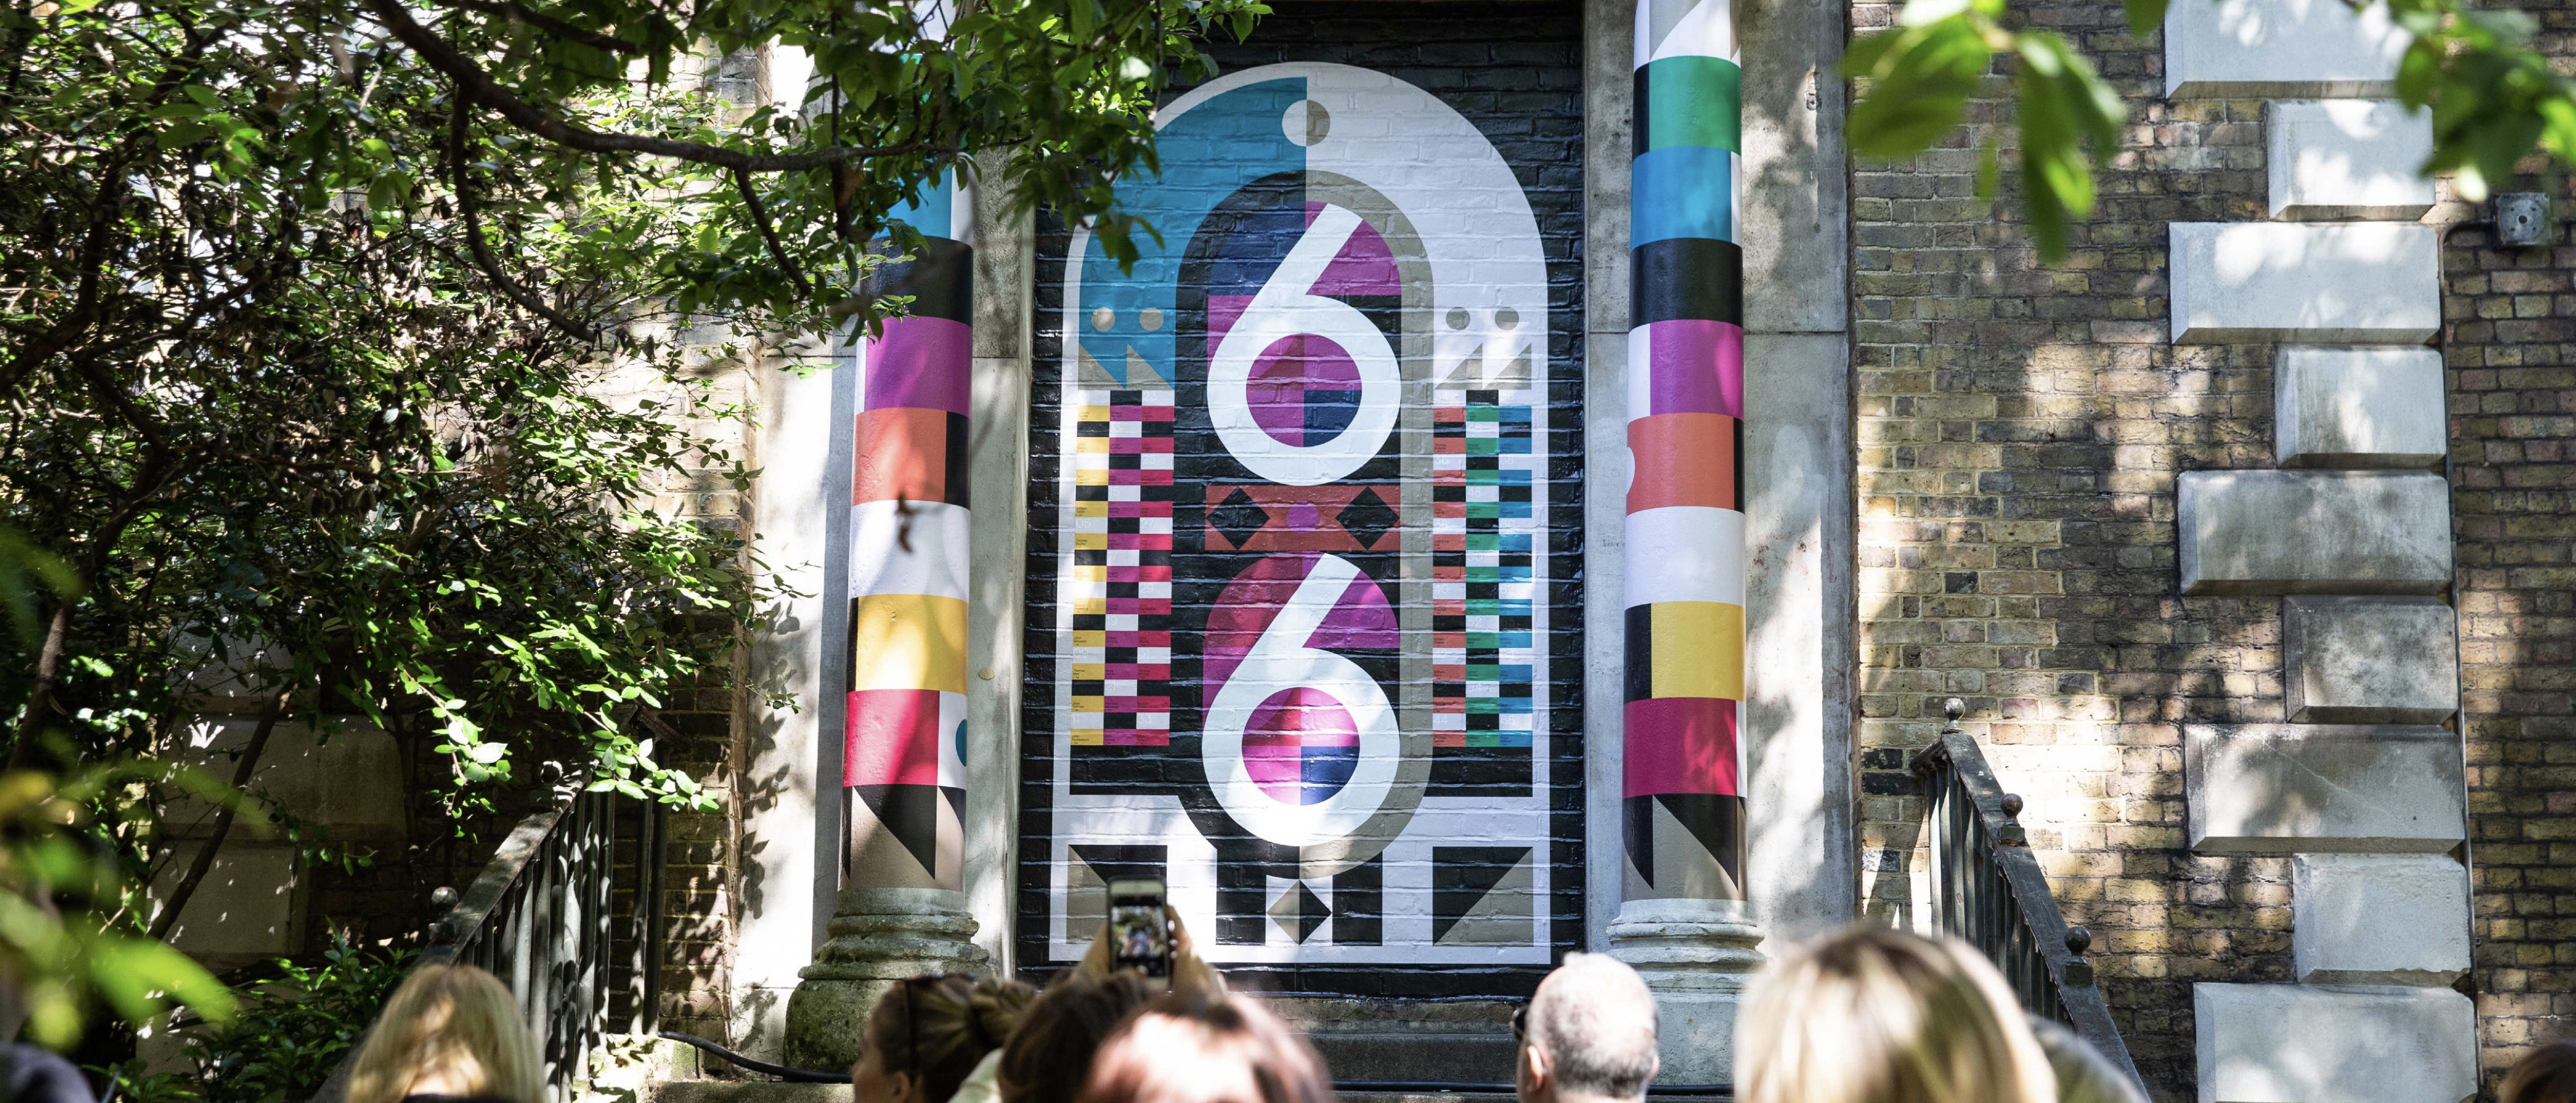 Multi-coloured mural of the number 66 painted by Alastair Ramageas as part of a project for Clerkenwell Design Week.